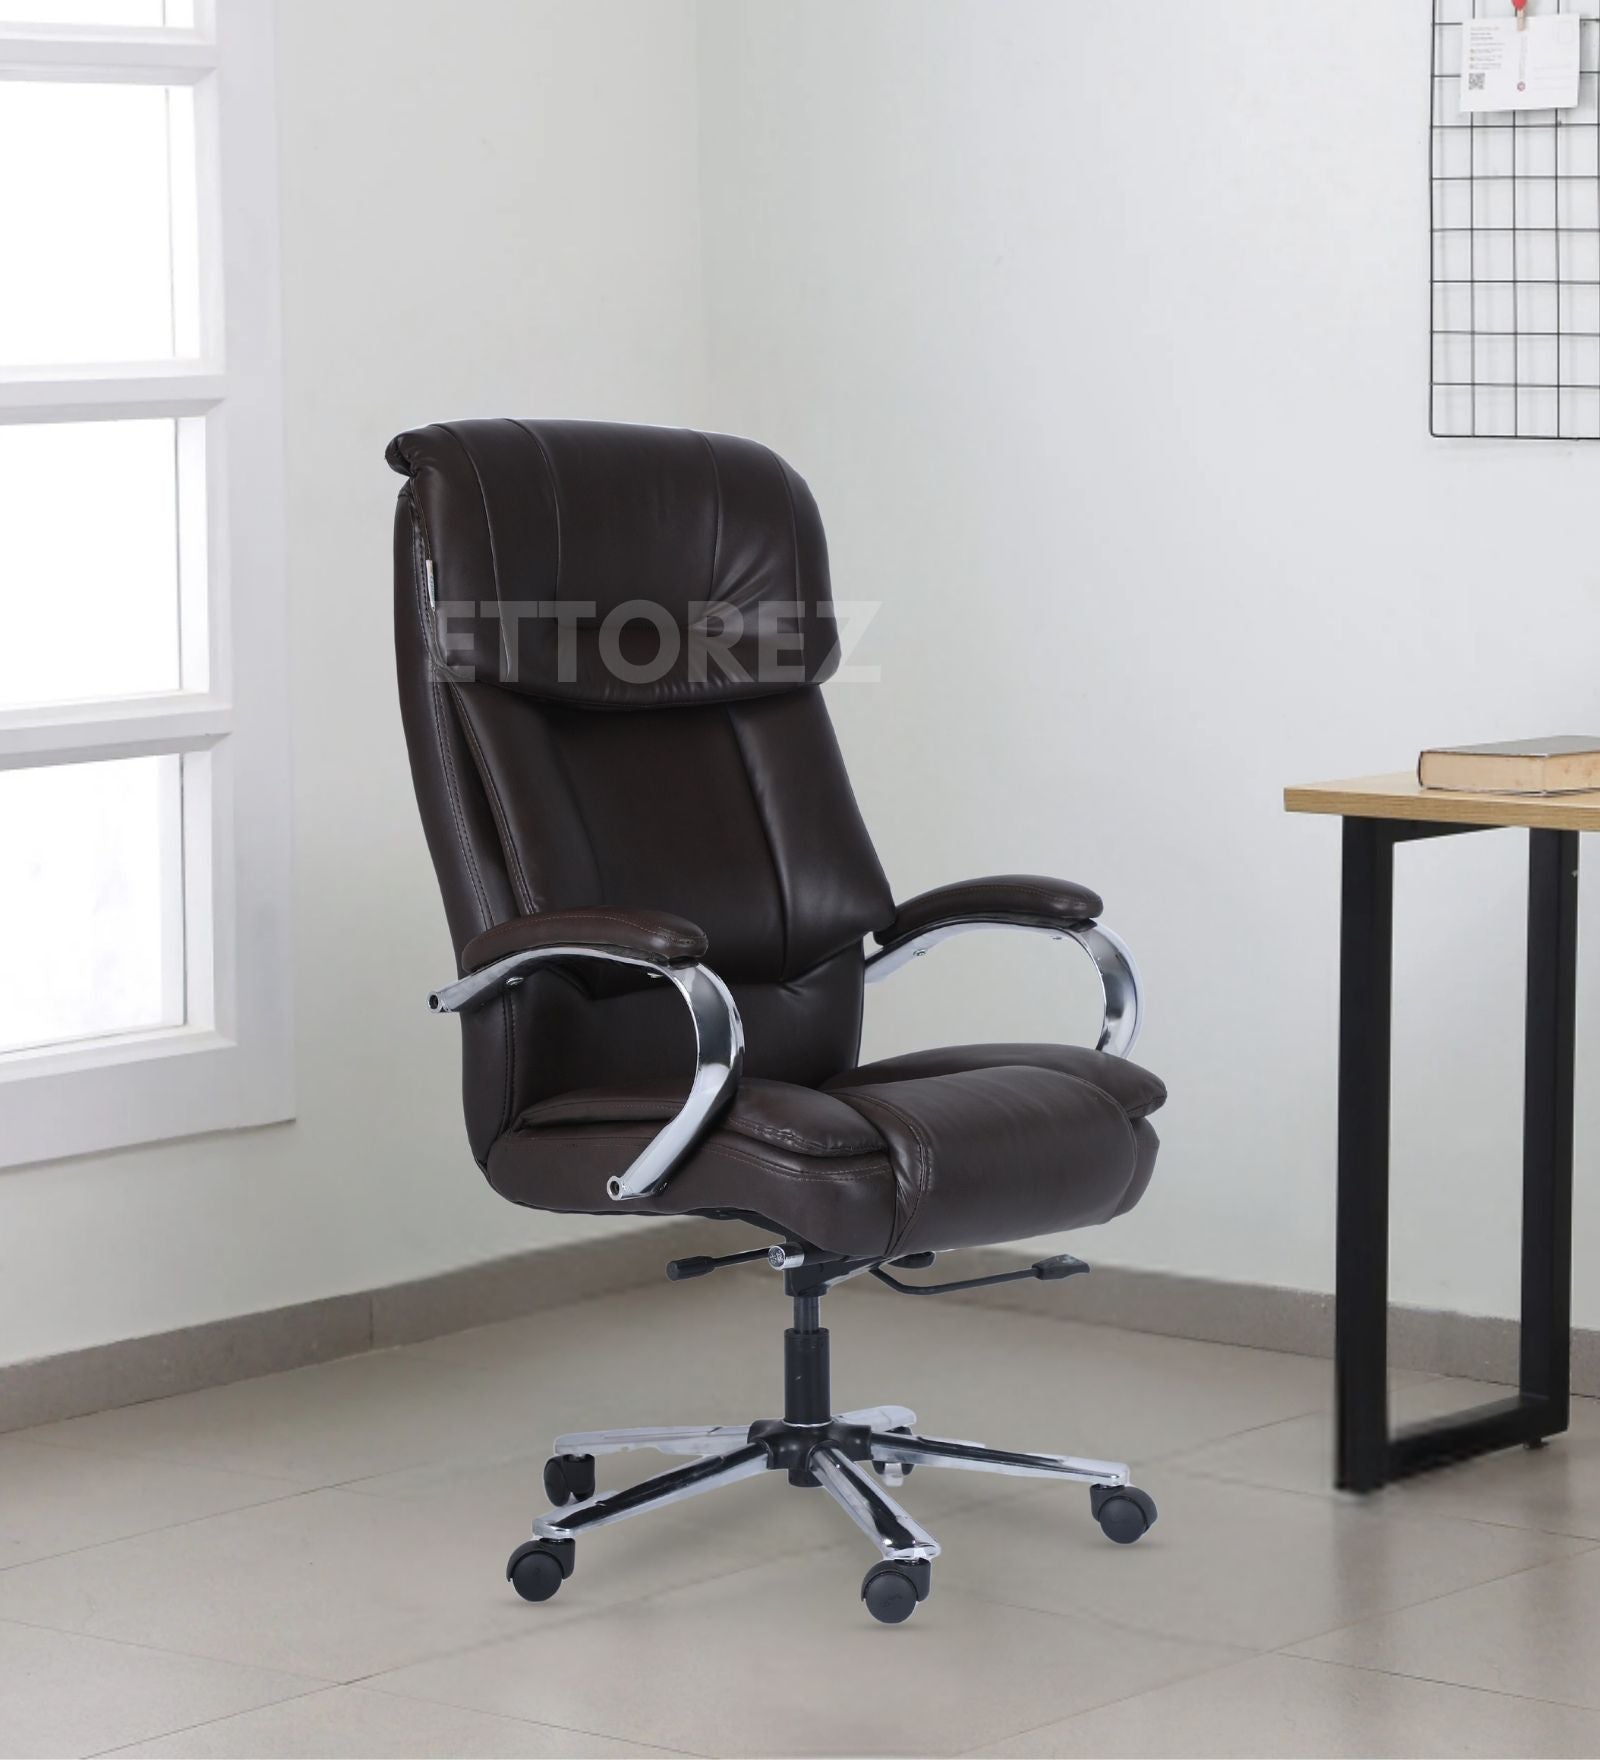 Ettorez GLOSTER High Back Leatherette Office Chair